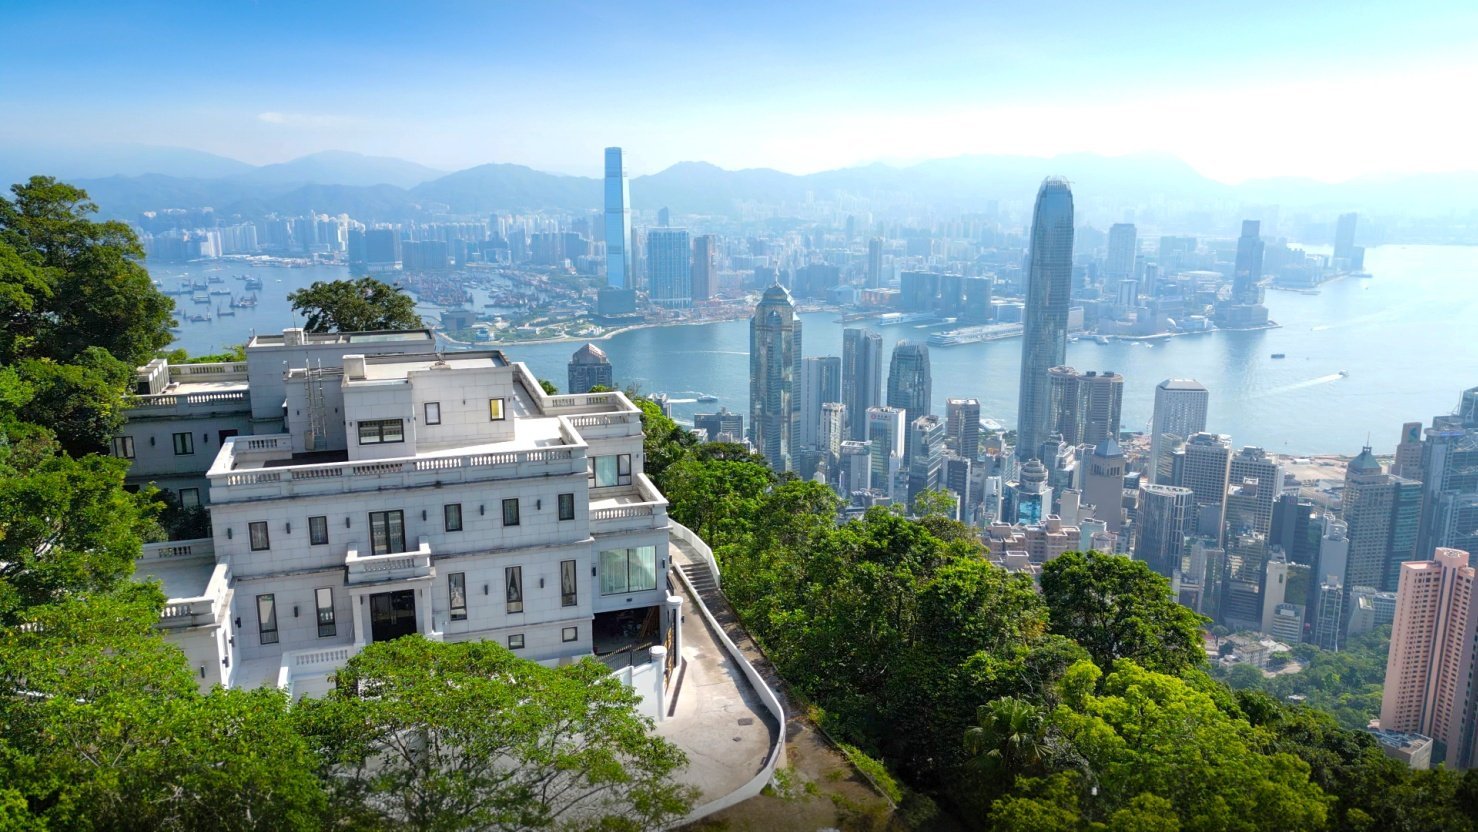 This property at 25-26 A&B Lugard Road was snapped up for HK$838 million (US$107 million), according to Savills Hong Kong. Photo: SCMP Handout